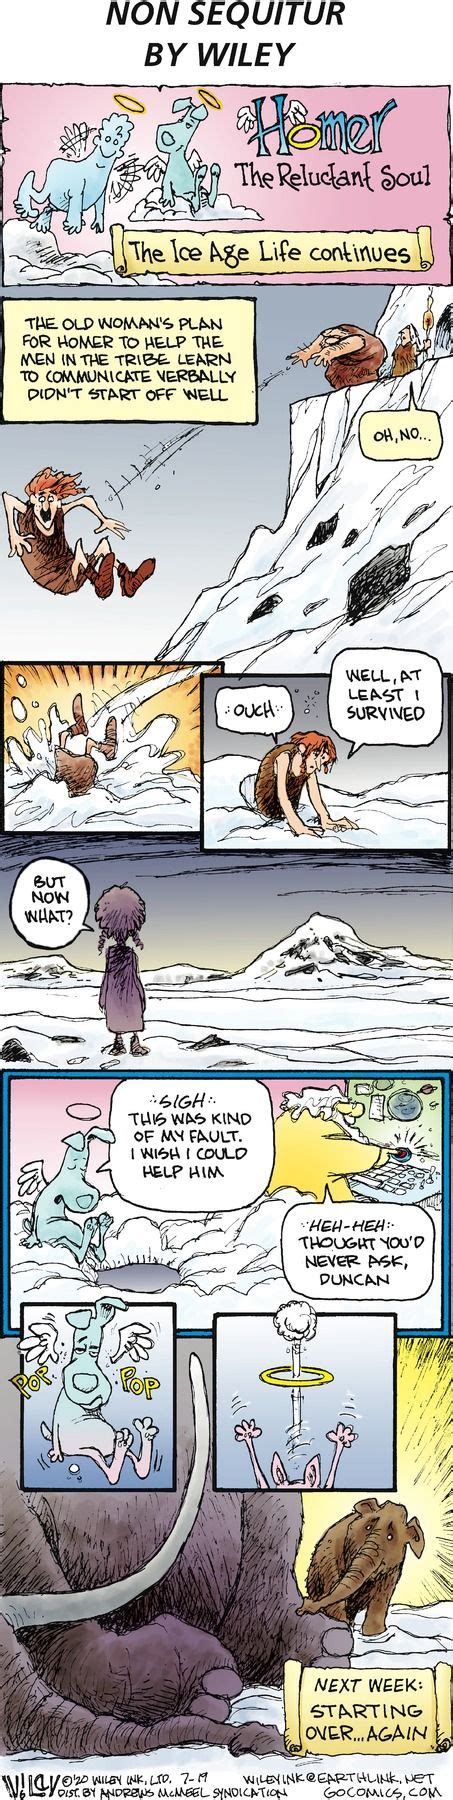 Non Sequitur By Wiley Miller For July Gocomics Com Fun